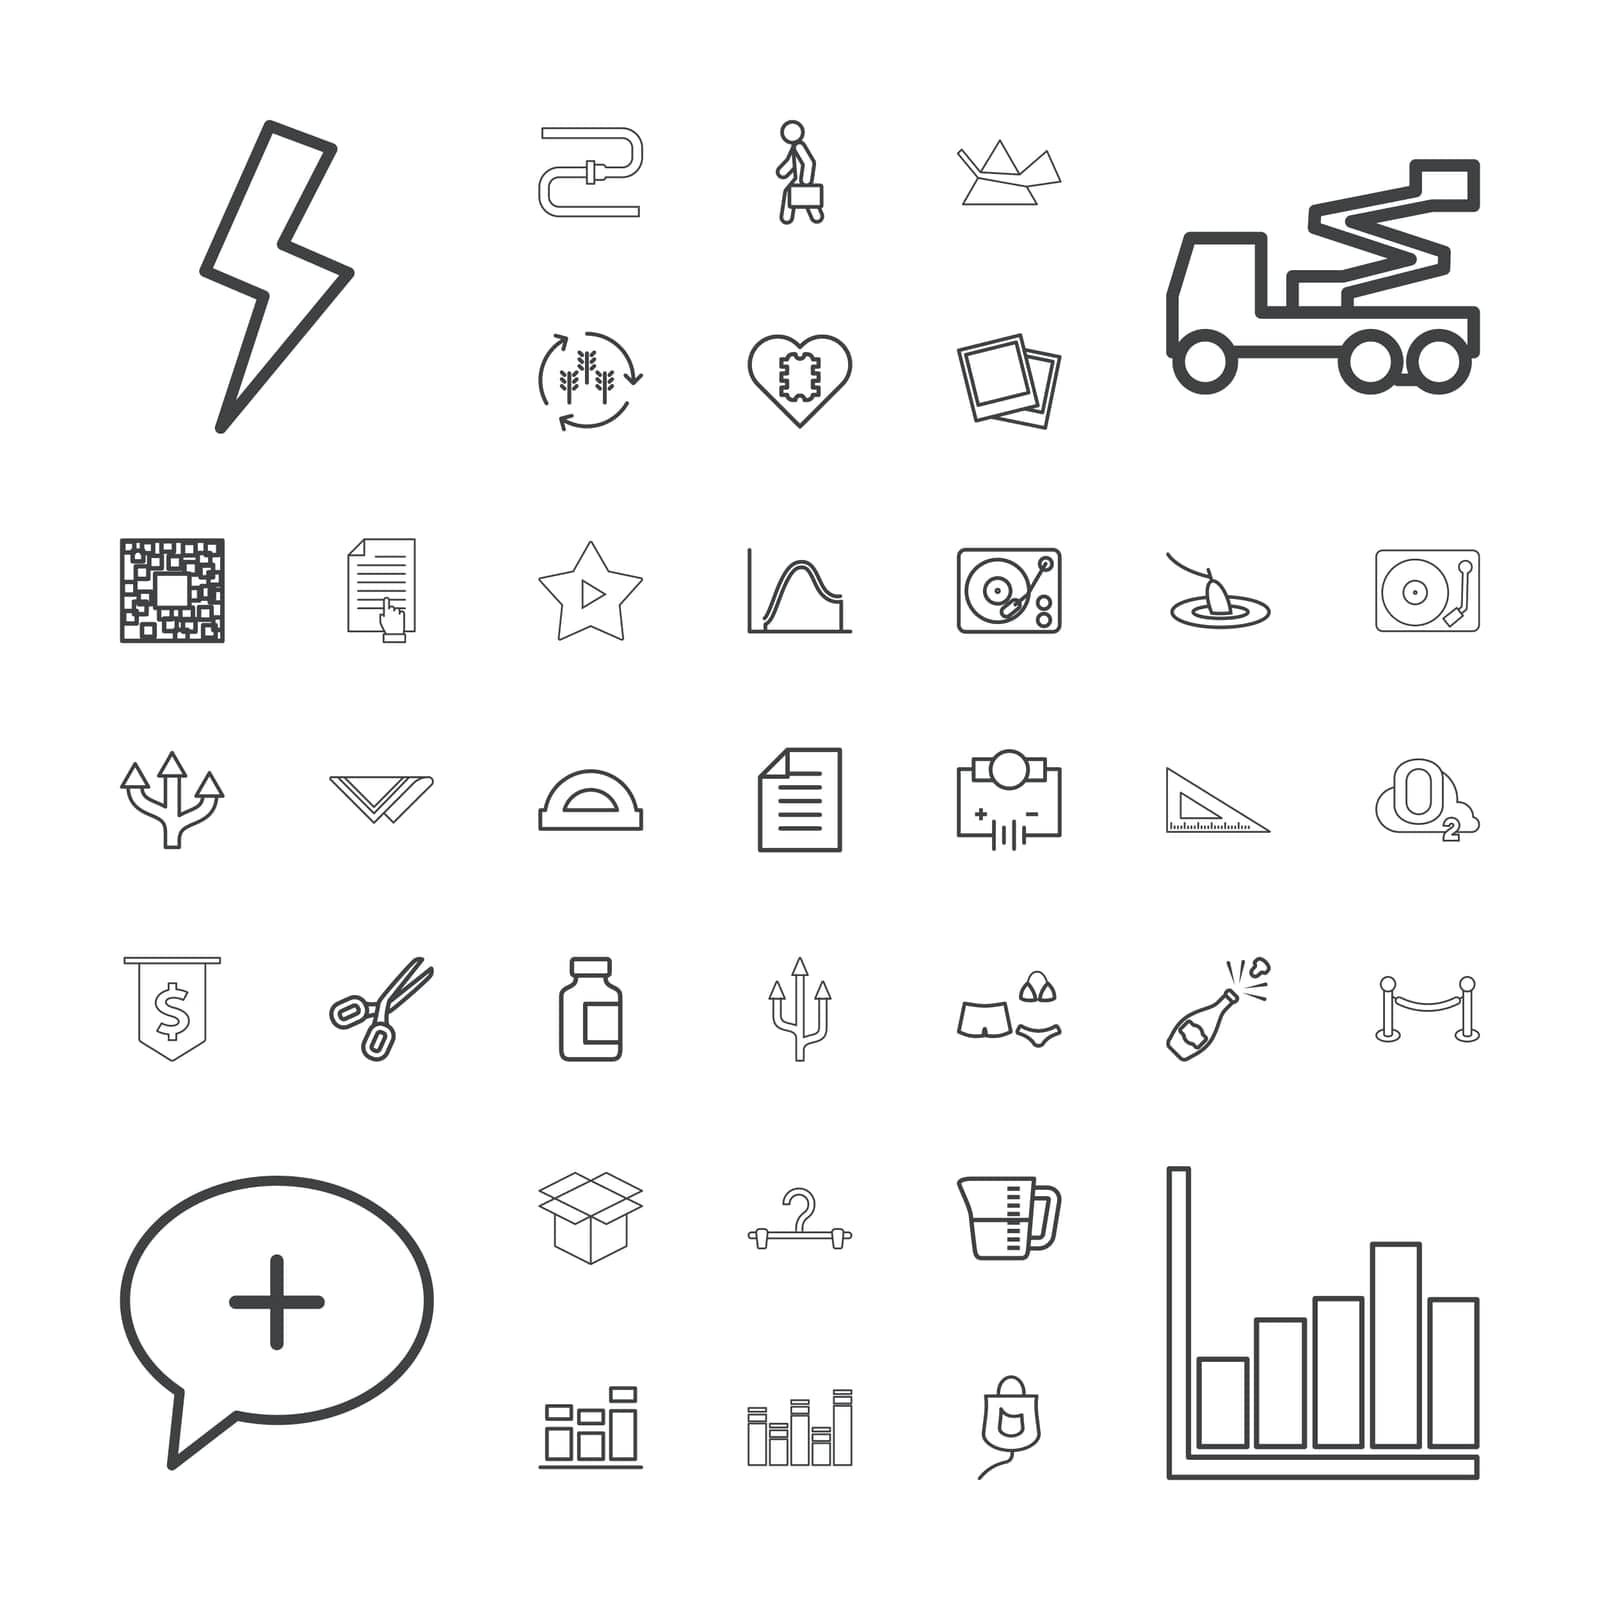 medical,code,arrow,line,document,icon,box,bottle,ruler,dollar,gramophone,music,paper,intersection,champagne,pointing,pipe,swimsuit,vector,man,oxygen,hanger,case,on,crane,qr,harvest,set,in,fishing,photo,cpu,electricity,graph,heart,o,scissors,with,cravat,protractor,fence,favorite,flash